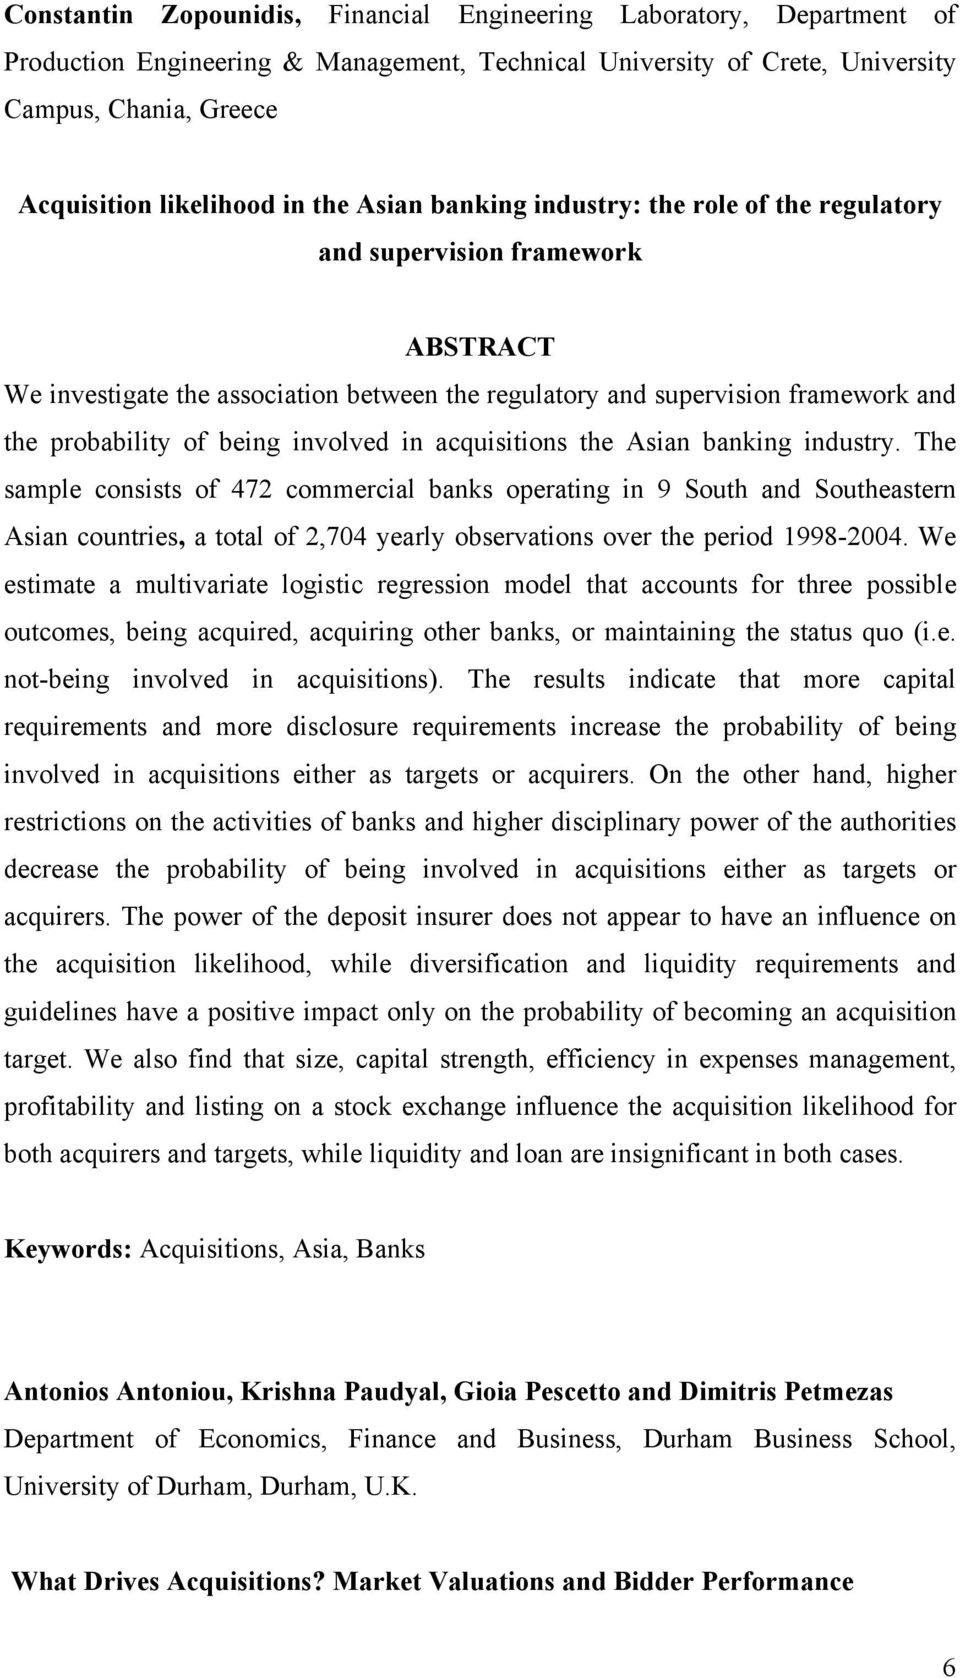 in acquisitions the Asian banking industry.